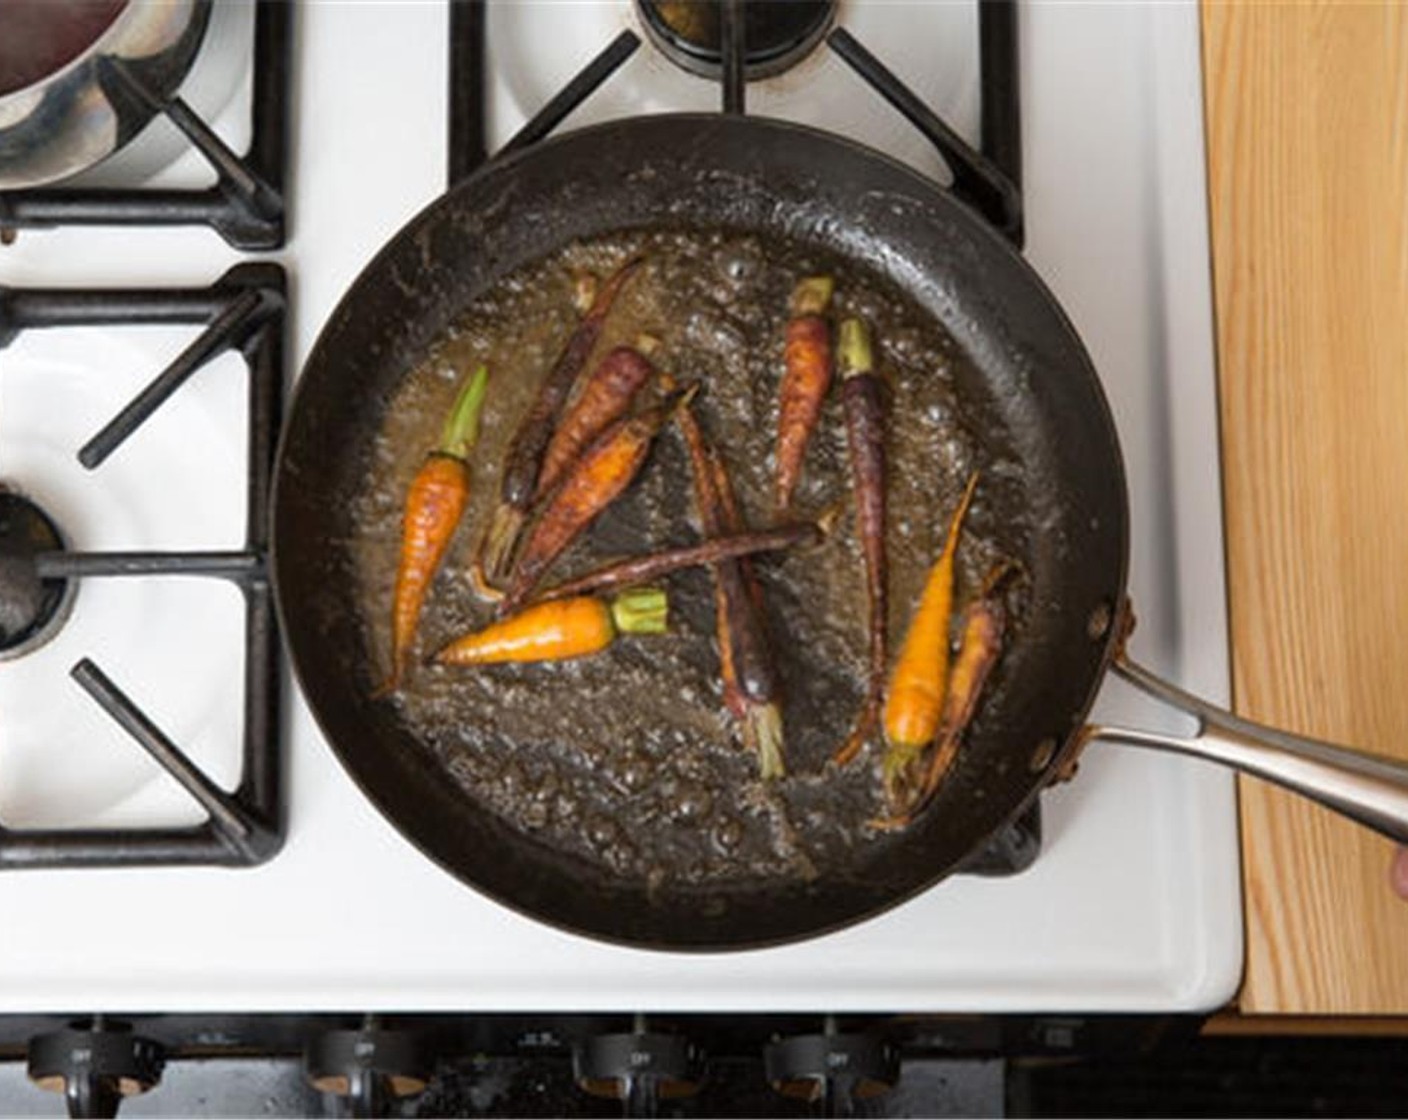 step 4 While the beets cook, in a large pan (nonstick, if you have one), heat Olive Oil (1/2 Tbsp) on medium-high until hot. Add the Heirloom Carrots (1/2 bunch) to cook, stirring occasionally, 4 to 6 minutes, or until slightly browned and tender.